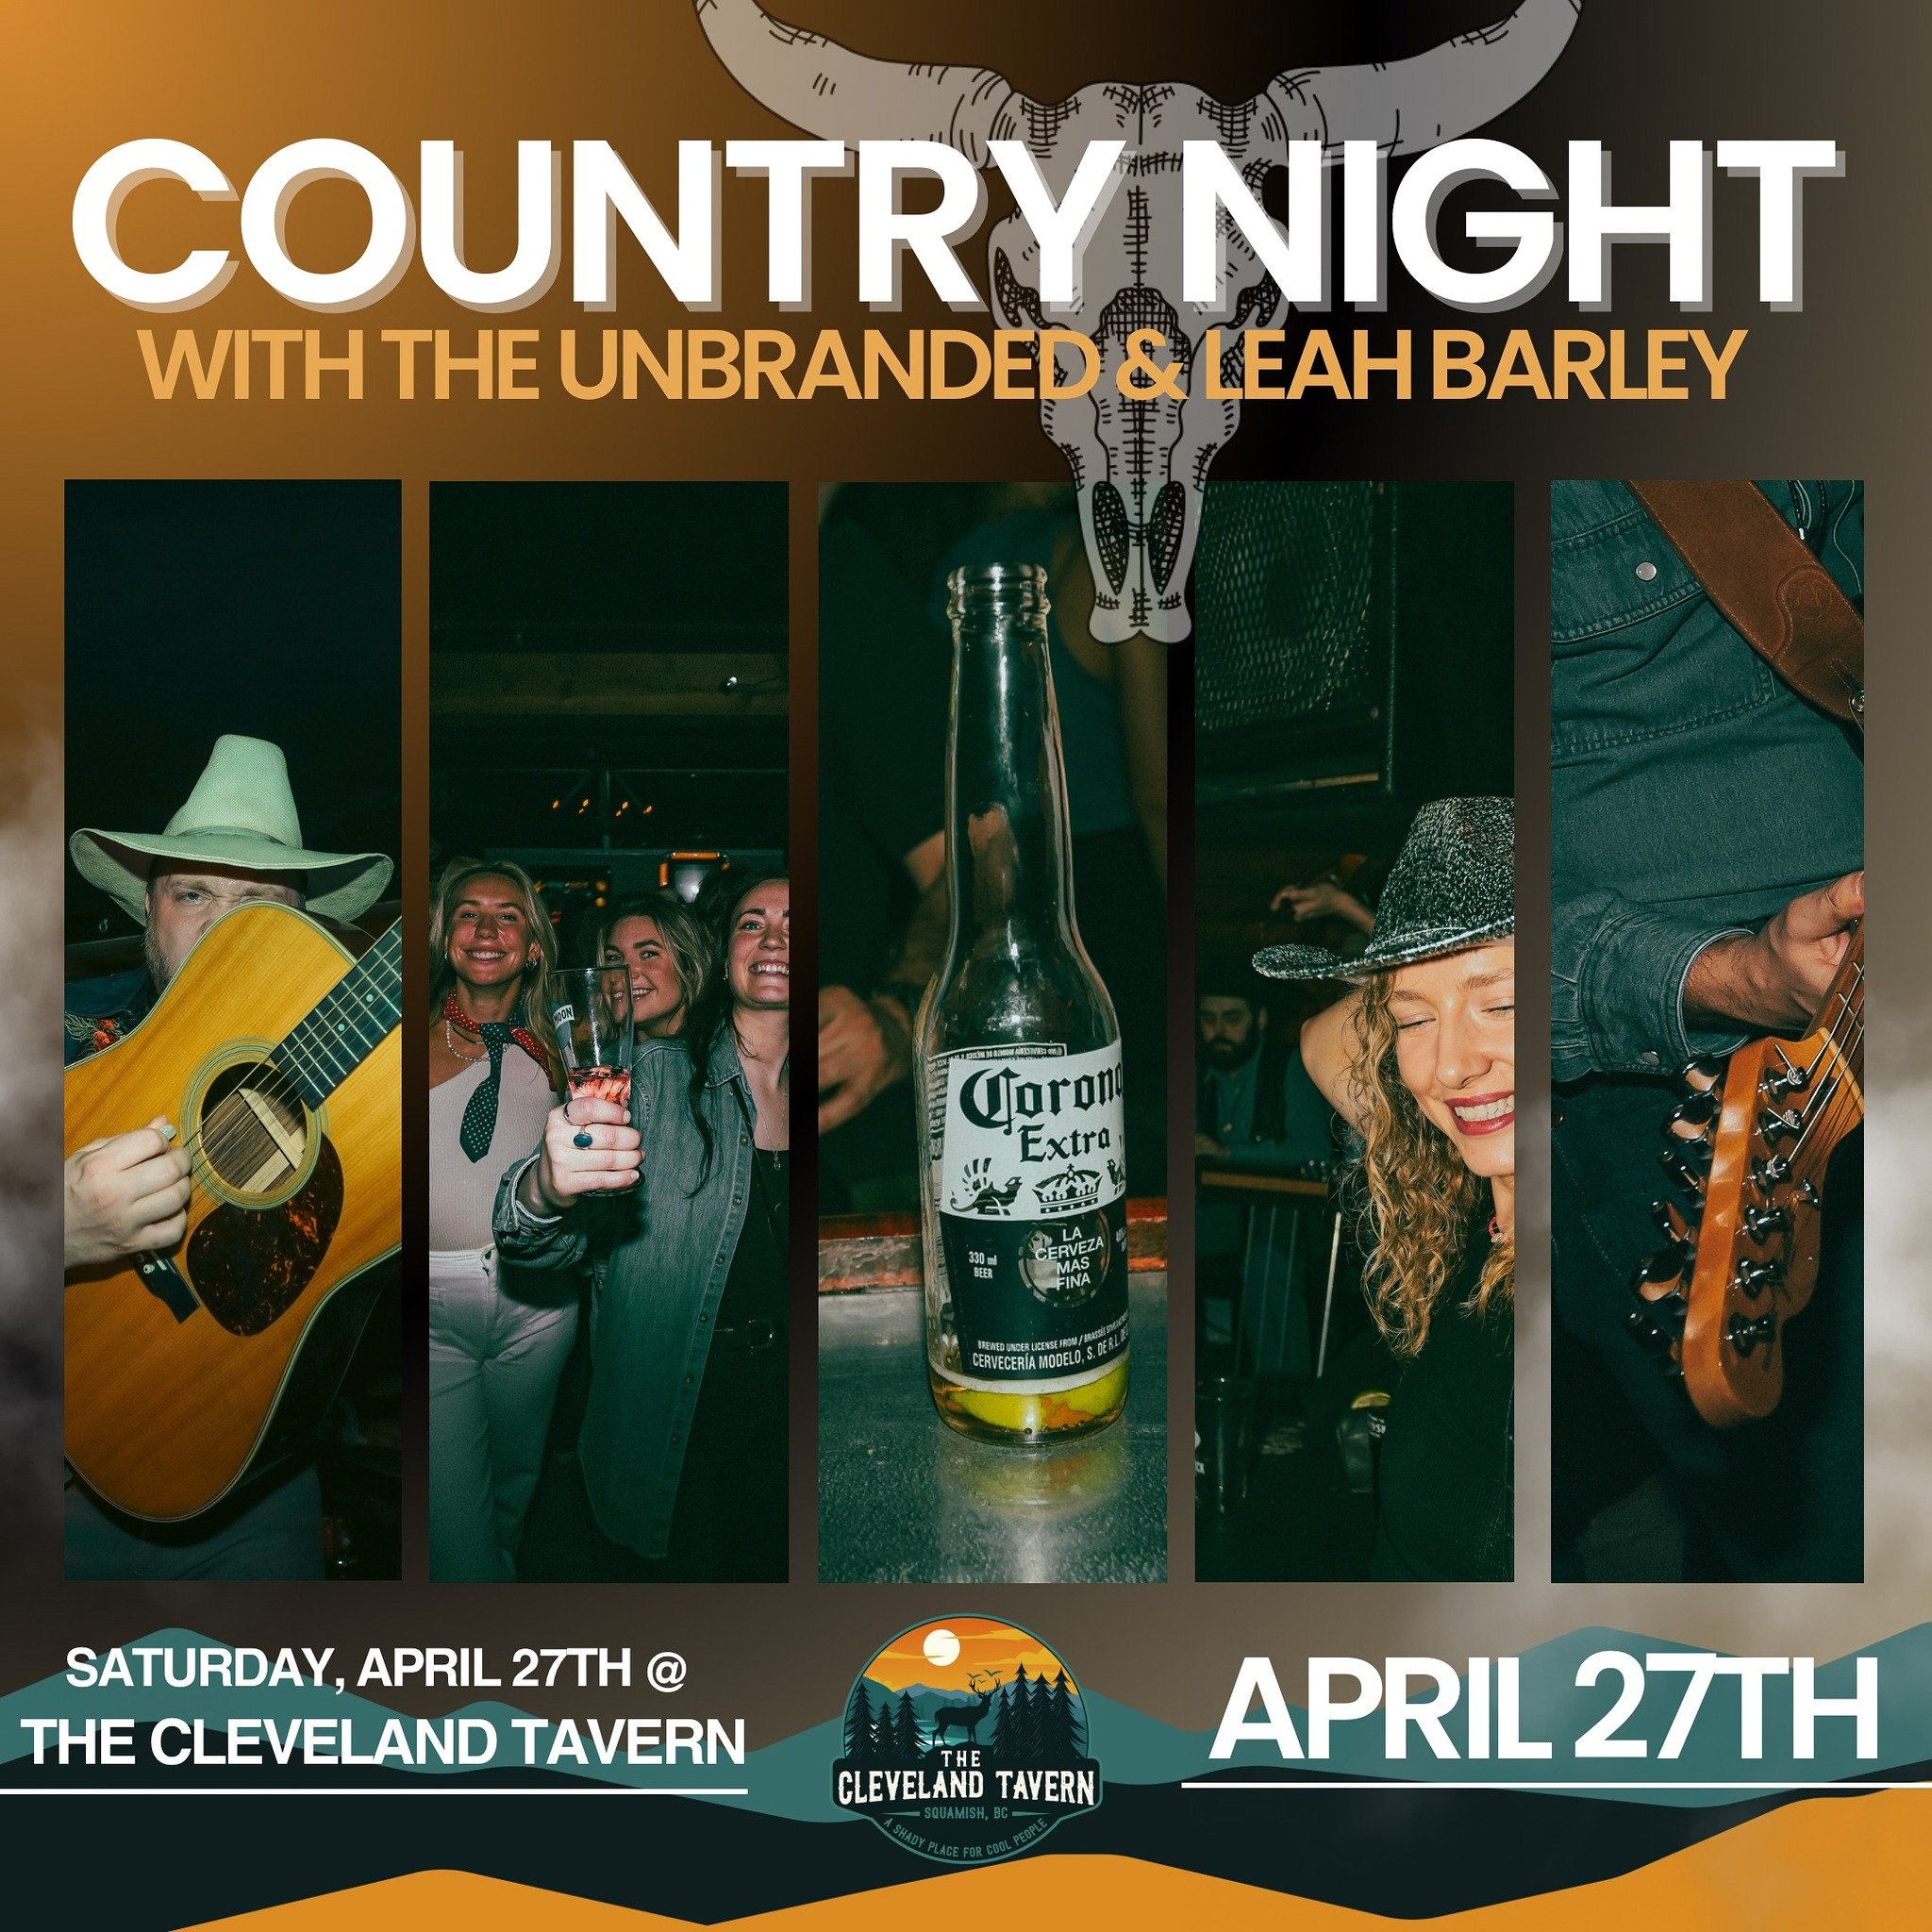 COUNTRY NIGHT at the @clevelandtavern is back for round 3 with the amazing @leahbarleymusic opening for our good friends @theunbrandedband on Saturday, April 27th @ 8PM!

Ticket link in bio 🎫 🔥